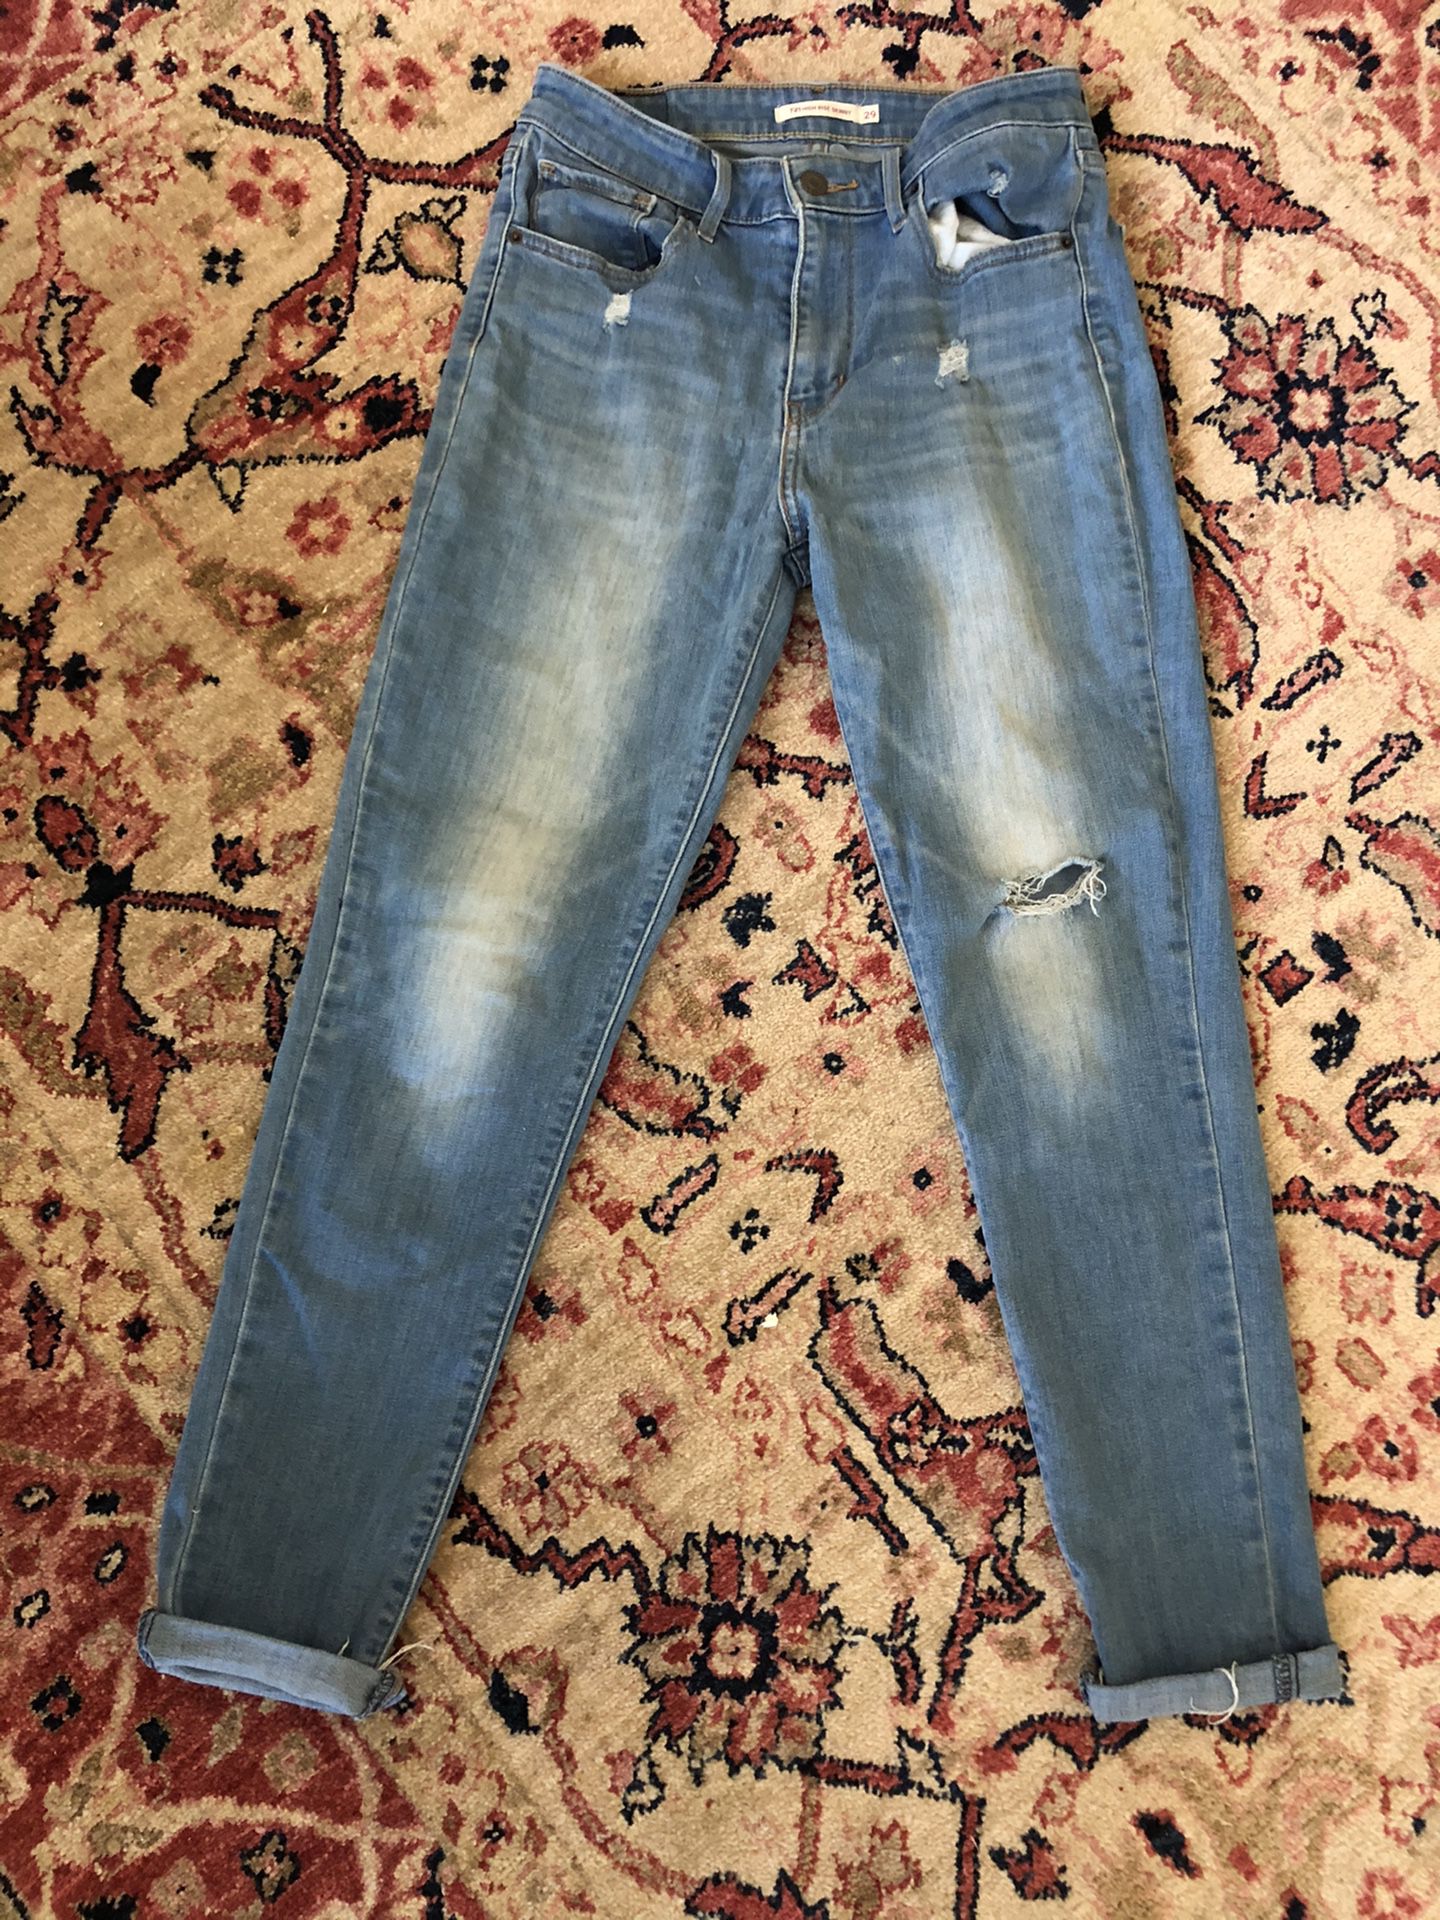 Levi's 721 high rise skinny jeans size 29